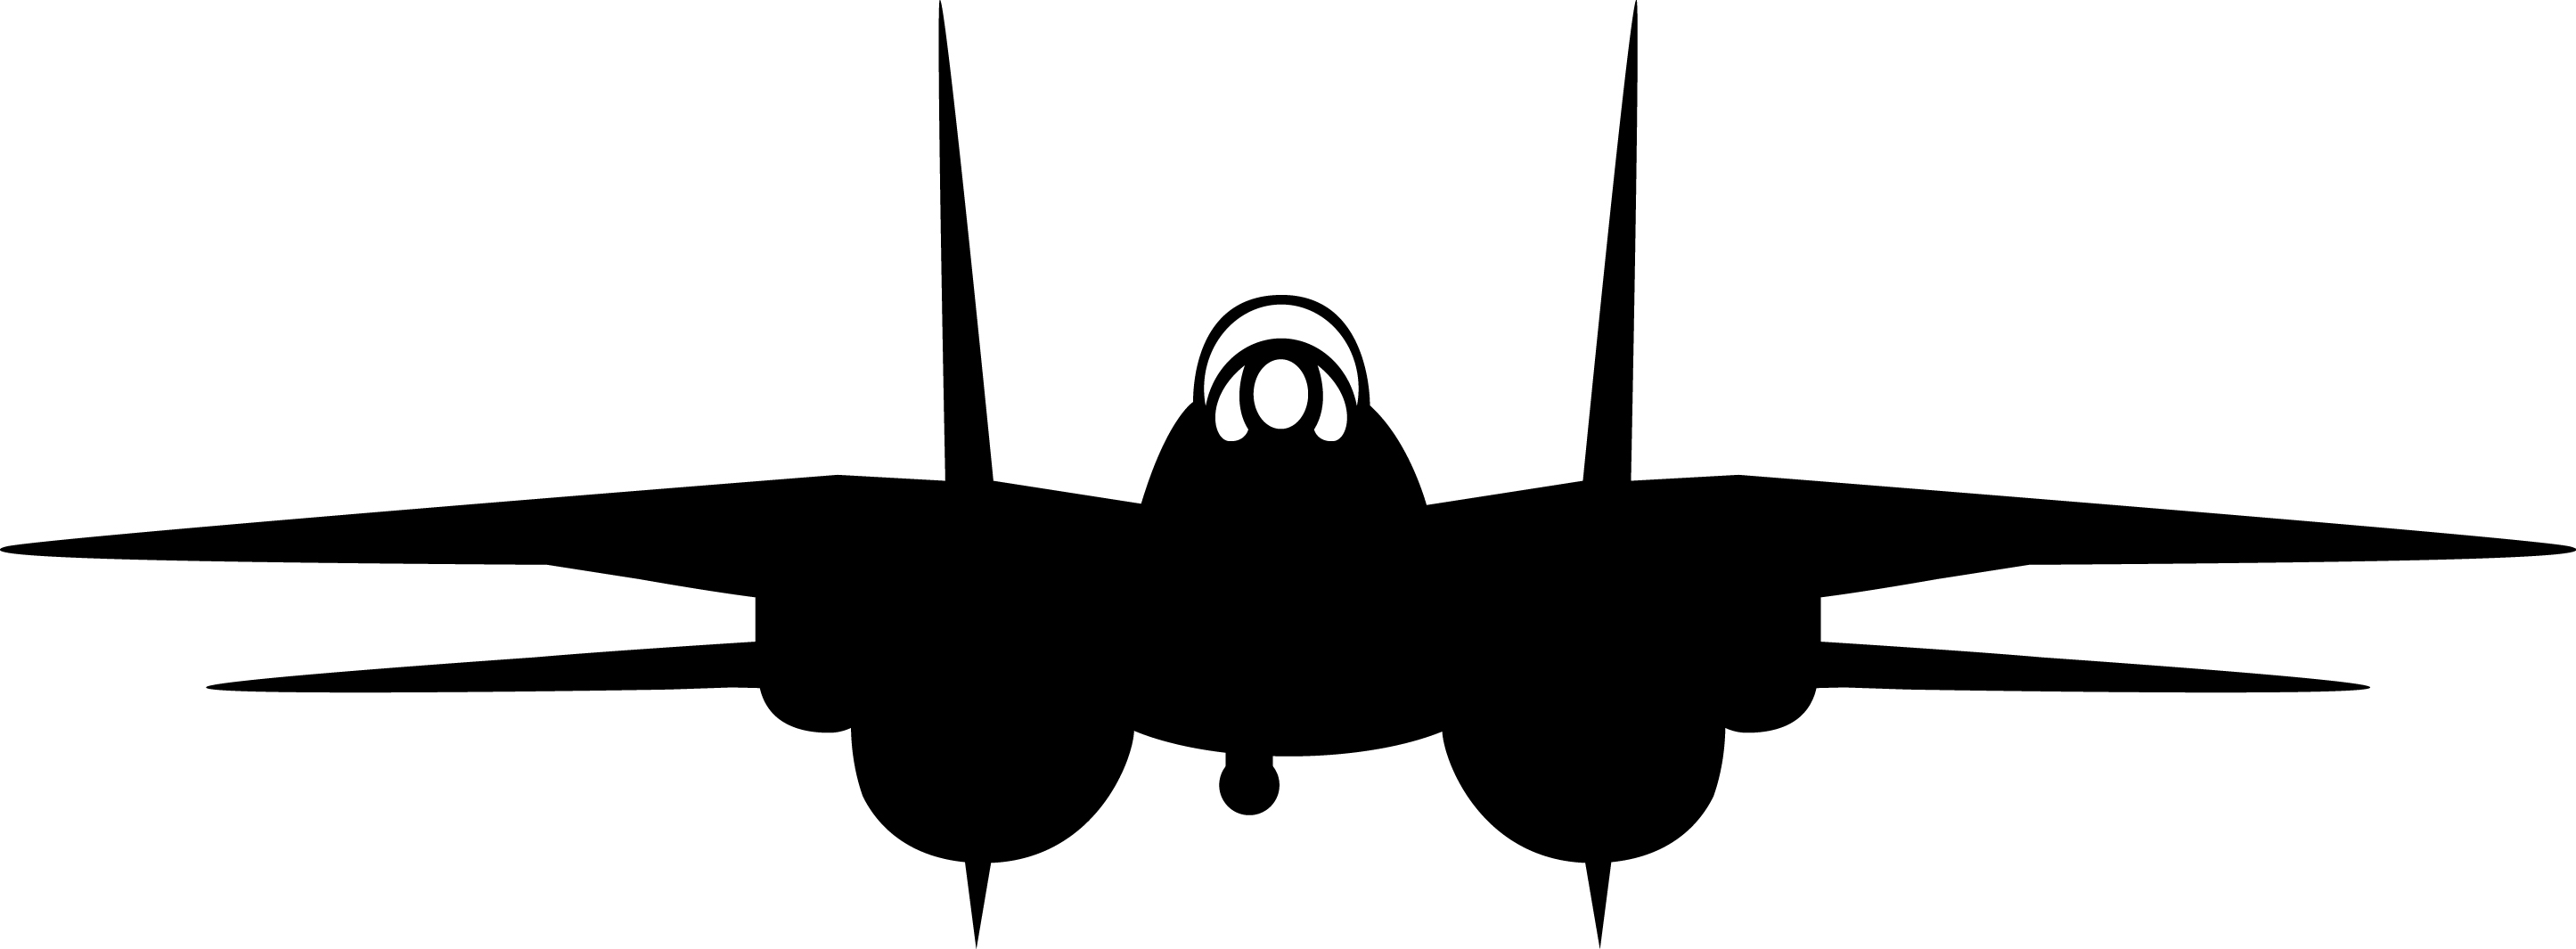 F-14 Tomcat - Invertable Silhouette | F-14 Decal | Aviation Decal ...